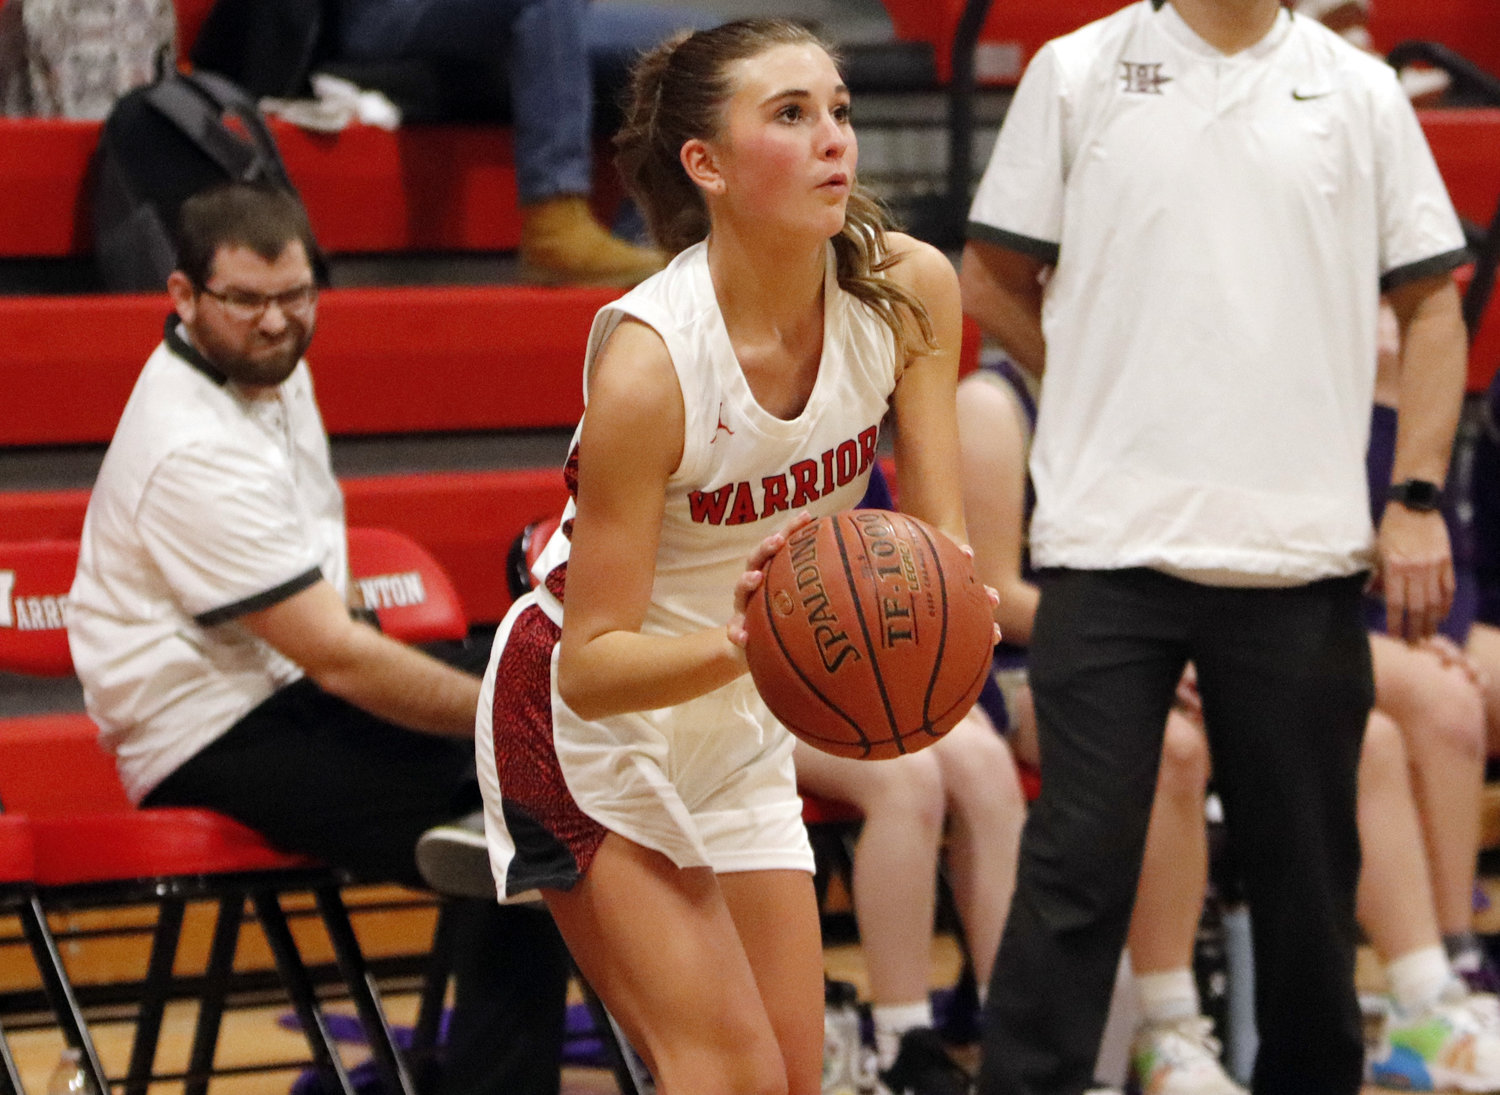 Isabel Benke prepares to shoot the ball during the first half of last week's game.